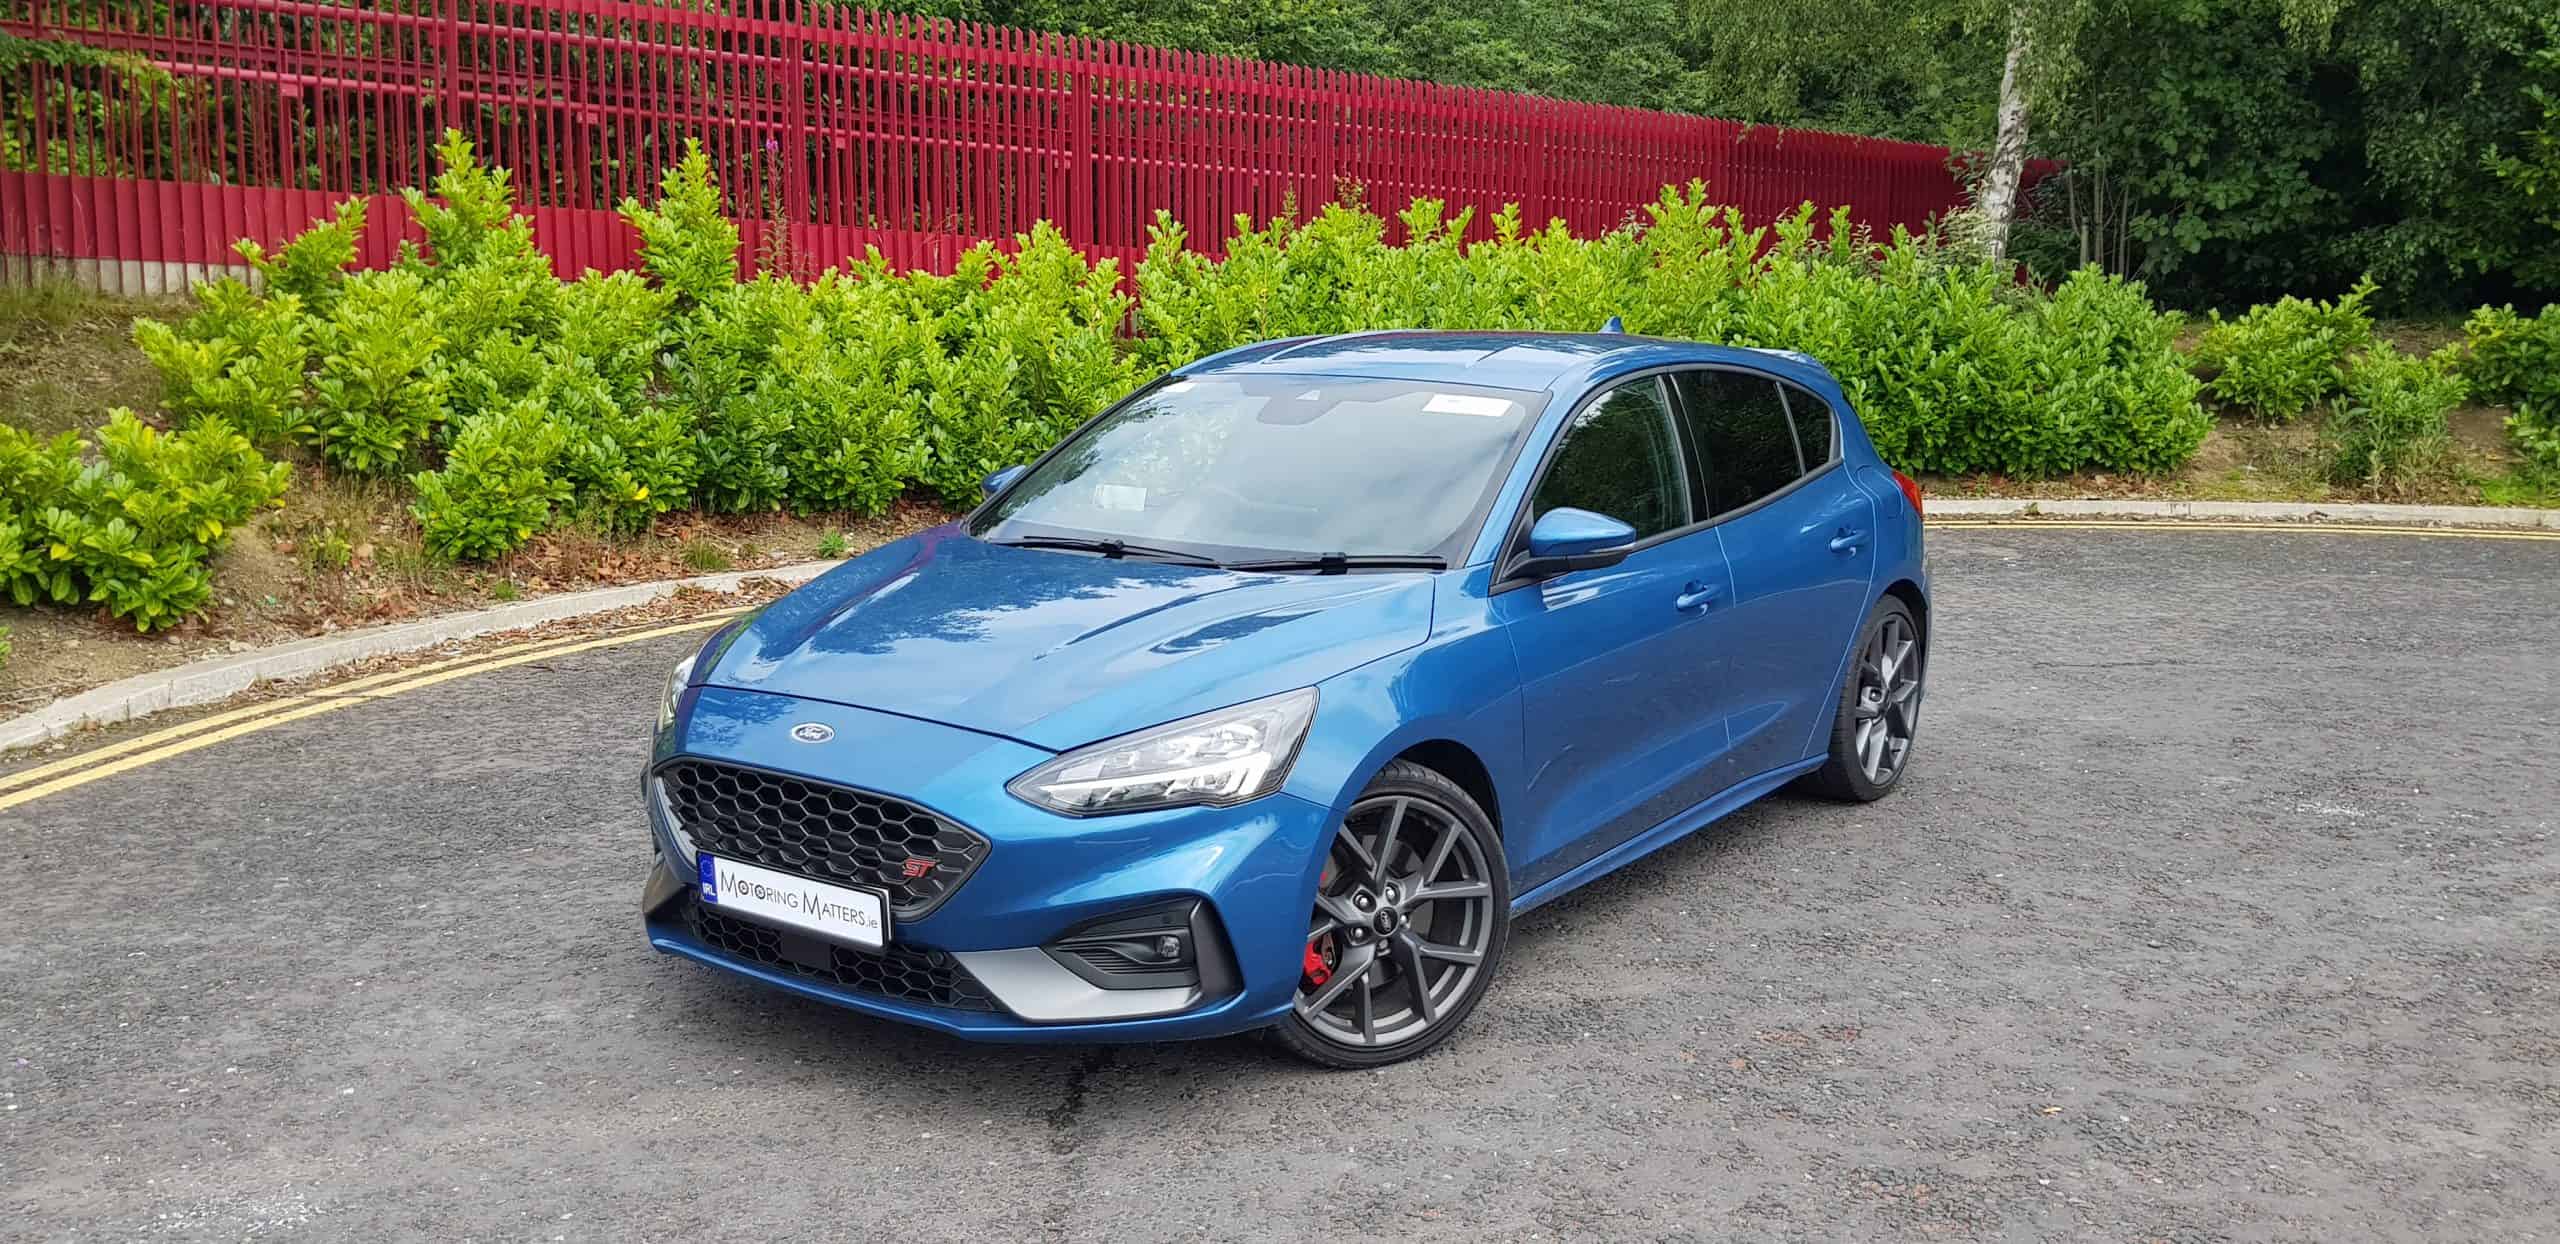 New Ford Focus ST - Ford's Hot Hatch is Reinvented With Style ...